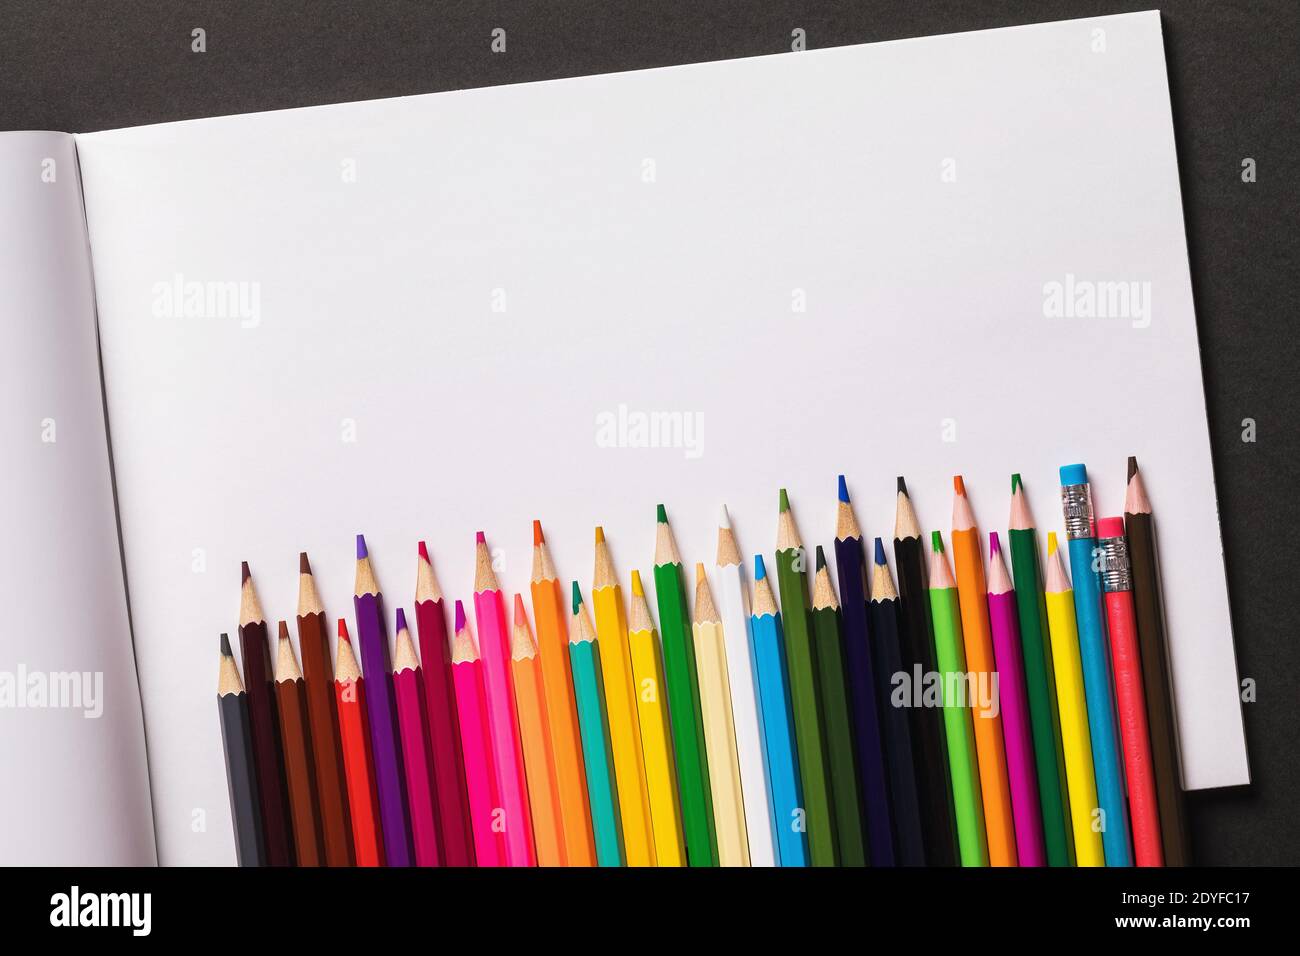 https://c8.alamy.com/comp/2DYFC17/open-sketchbook-and-colored-pencils-on-a-dark-background-with-copy-space-top-view-2DYFC17.jpg